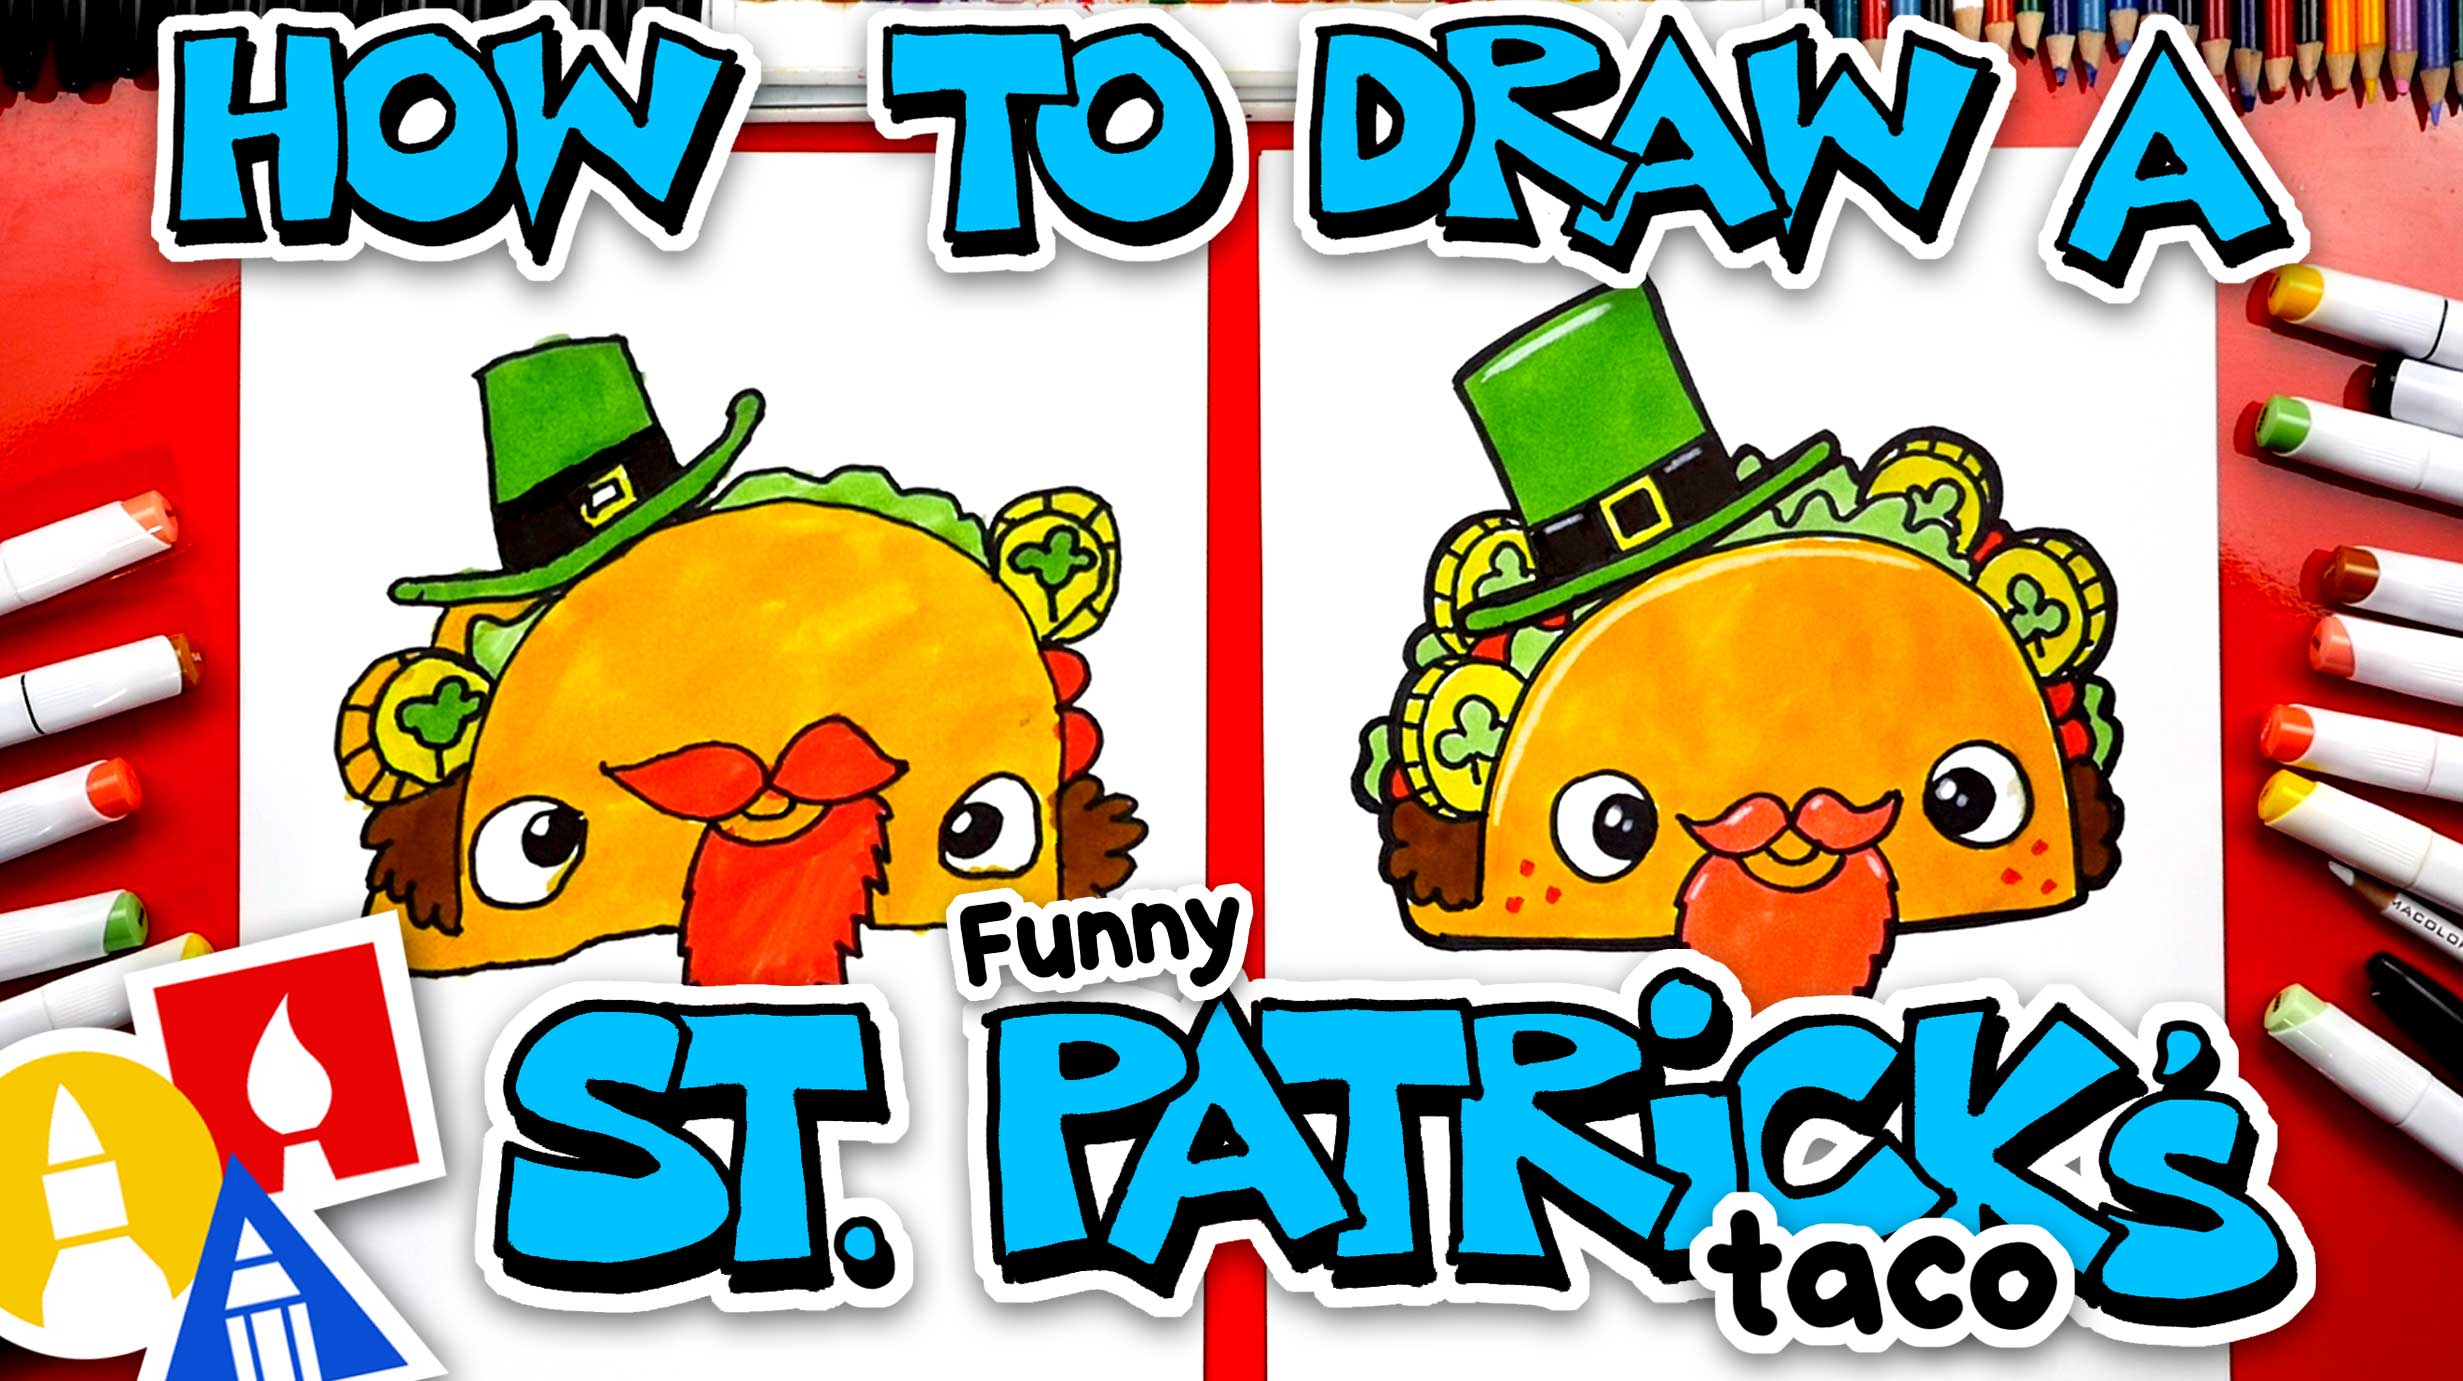 How To Draw A Funny St. Patrick's Taco - Art For Kids Hub